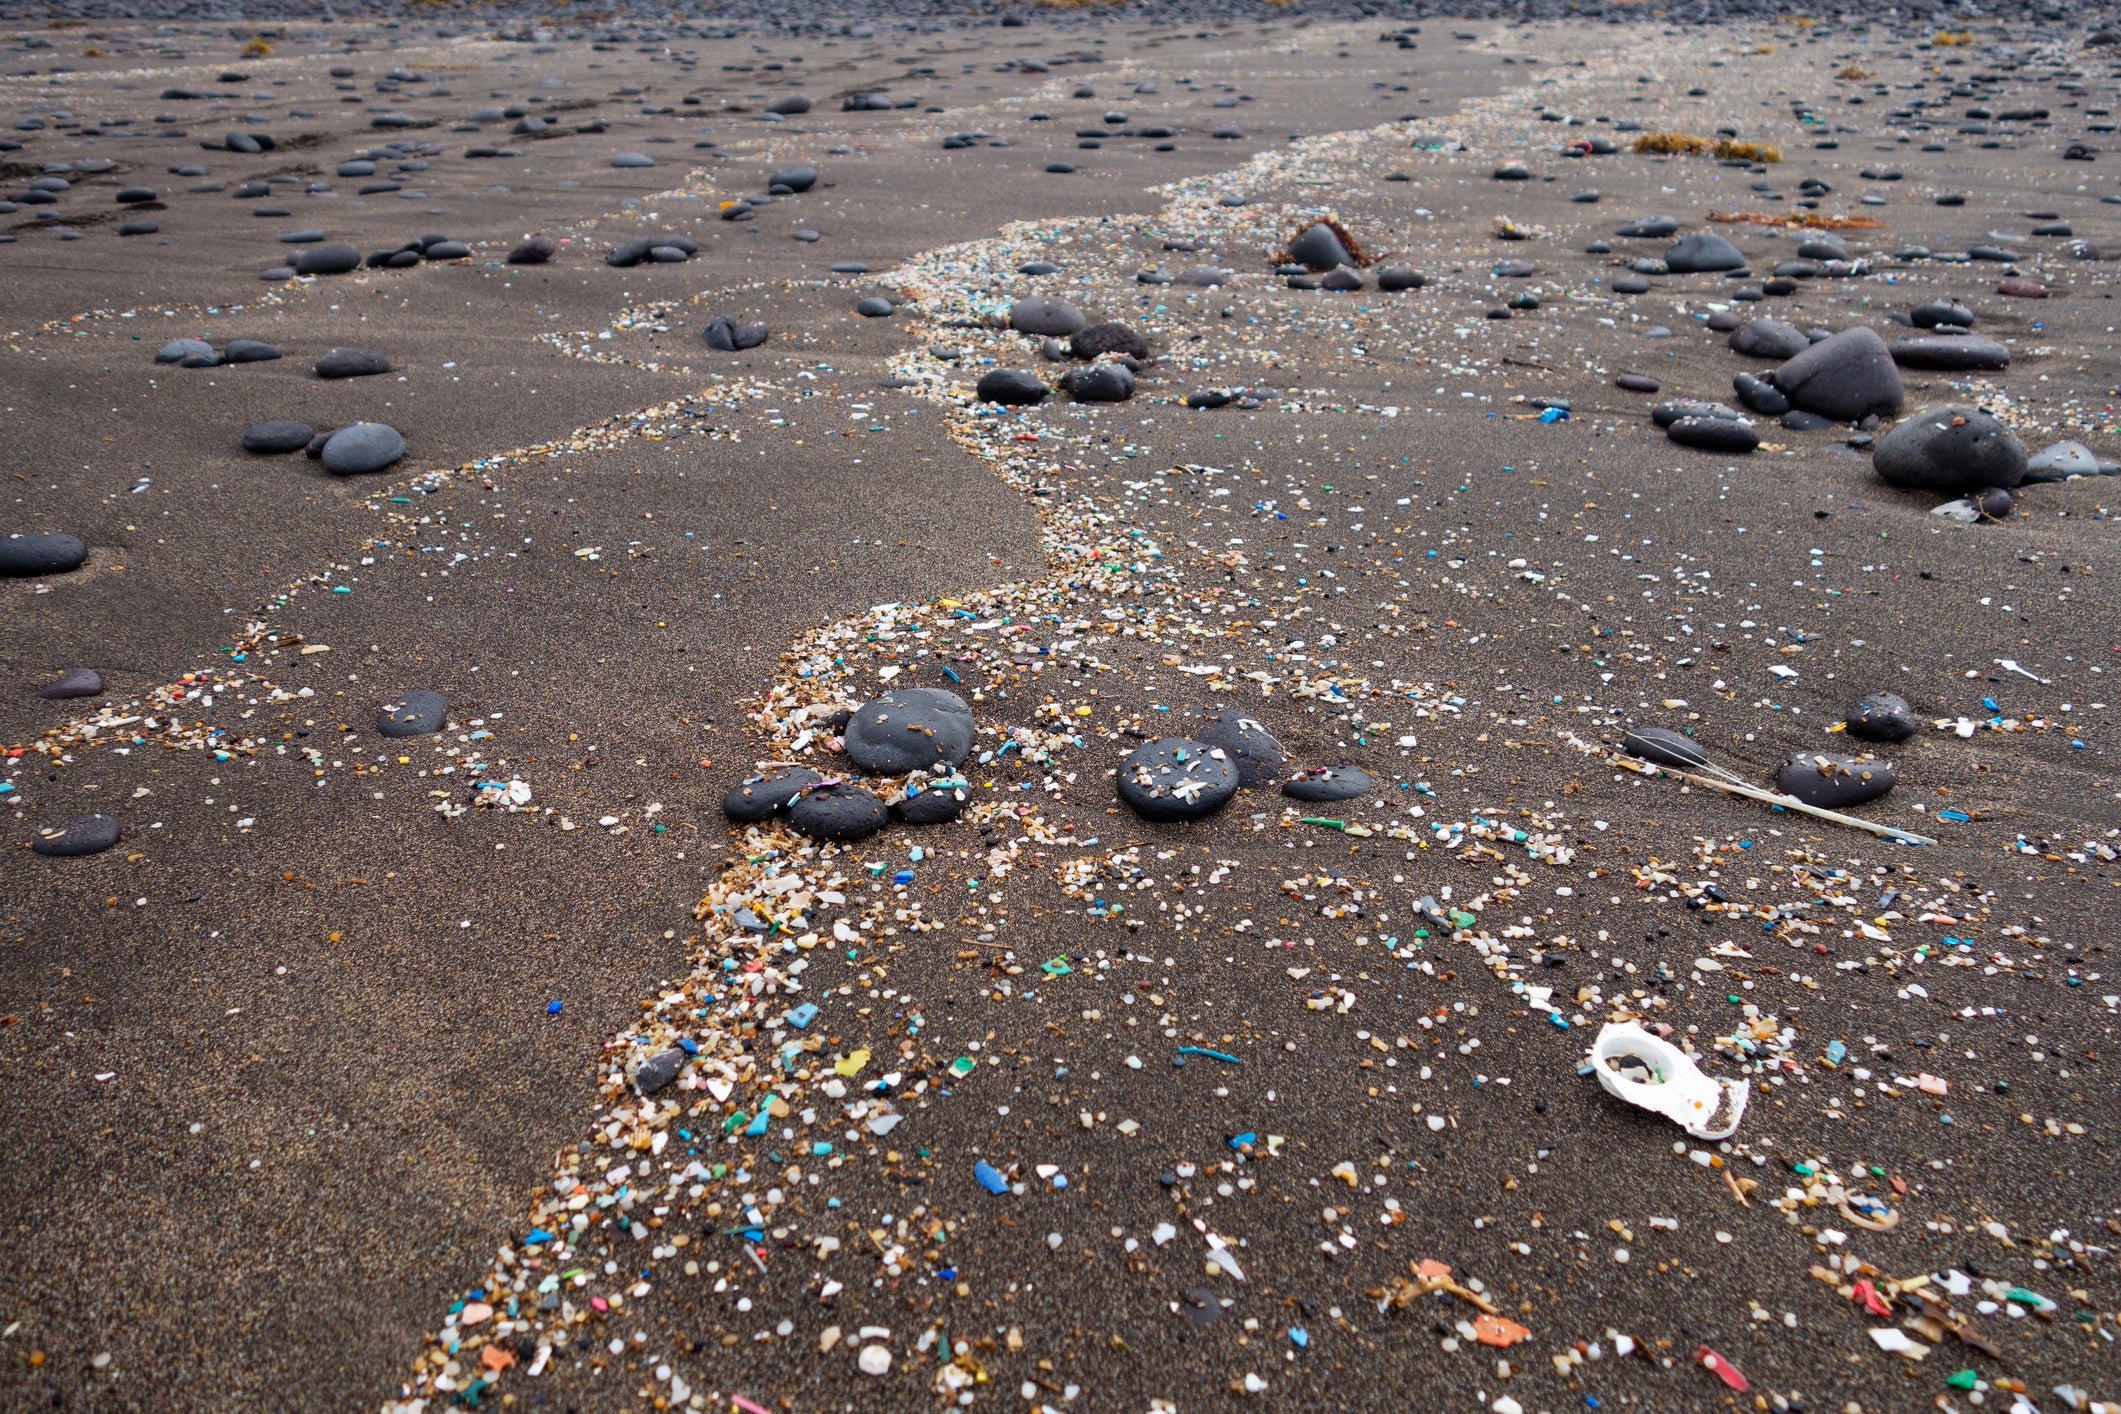 Plastic scattered on beaches